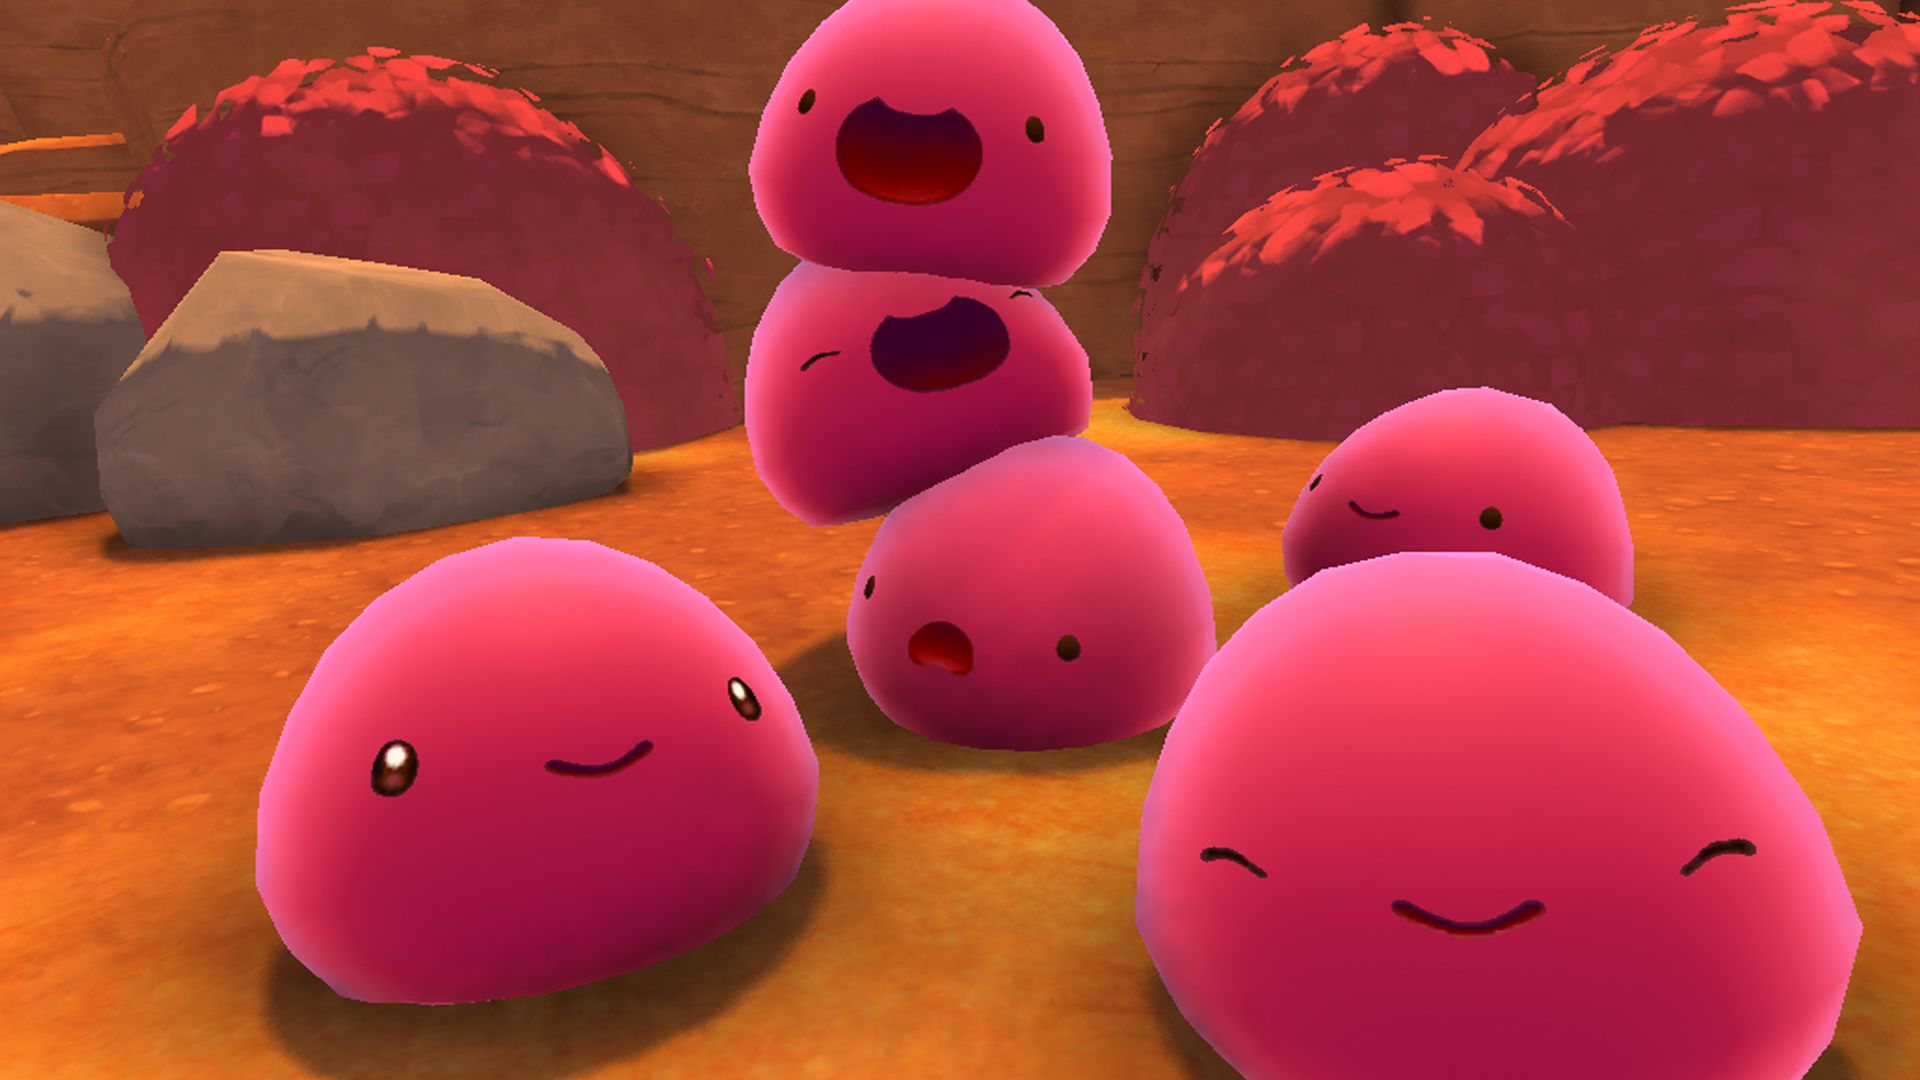 free download slime rancher switch